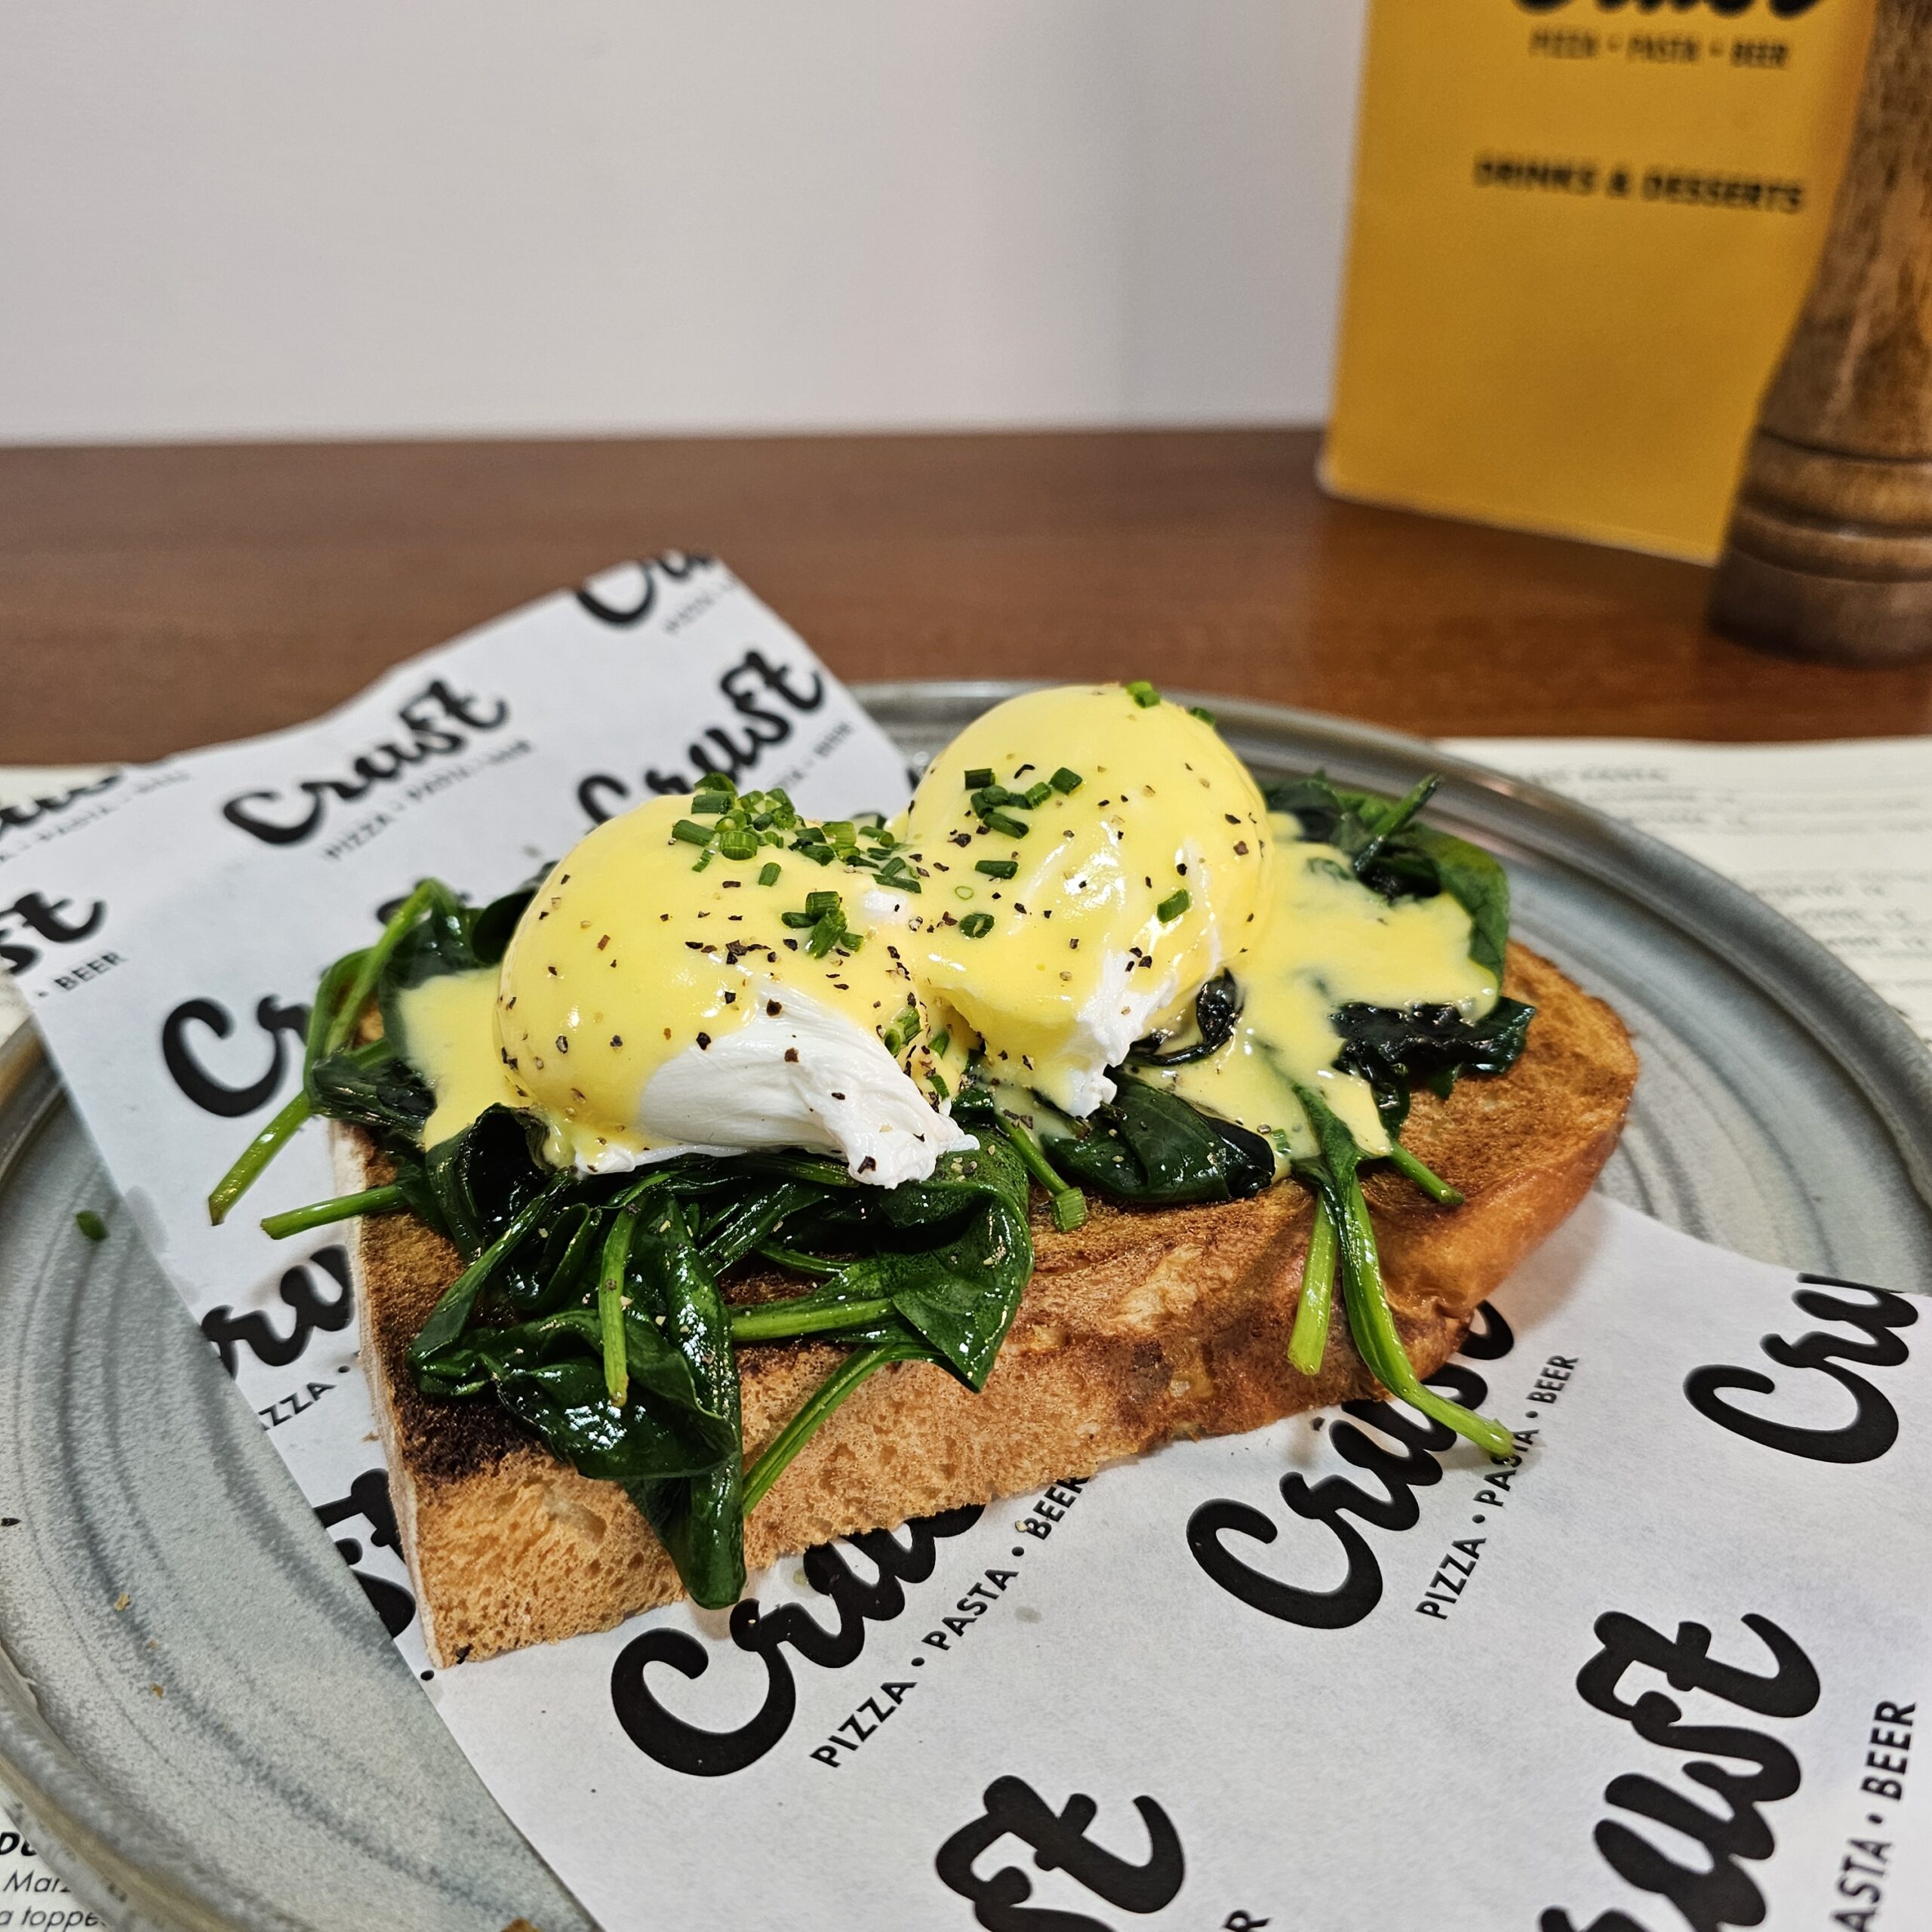 Crust Caffe - Breakfast - The Guide Liverpool